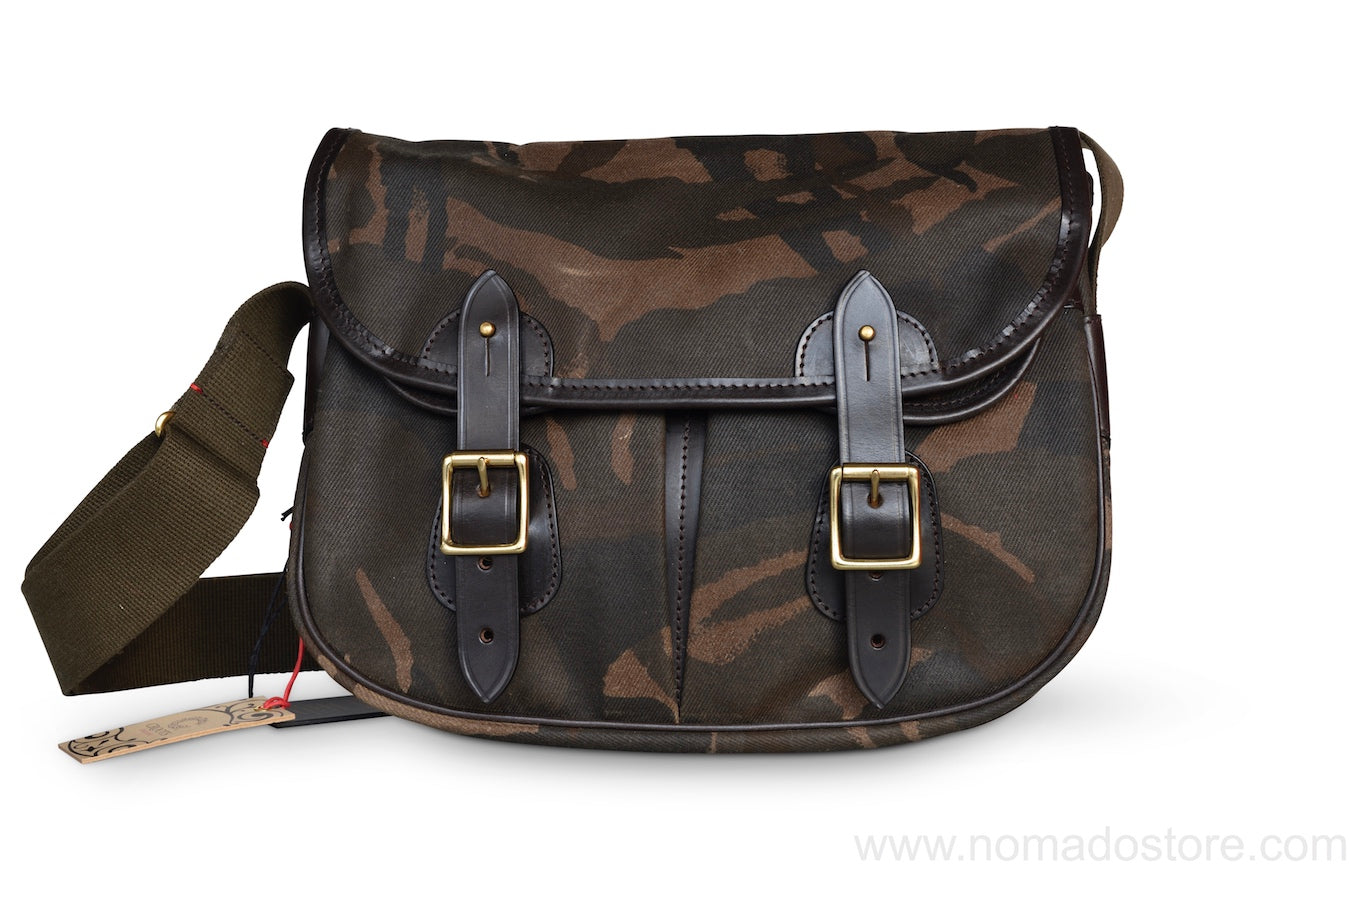 CROOTS DALBY CARRYALL BAG (M) WAXED CAMOUFLAGE - NOMADO Store 